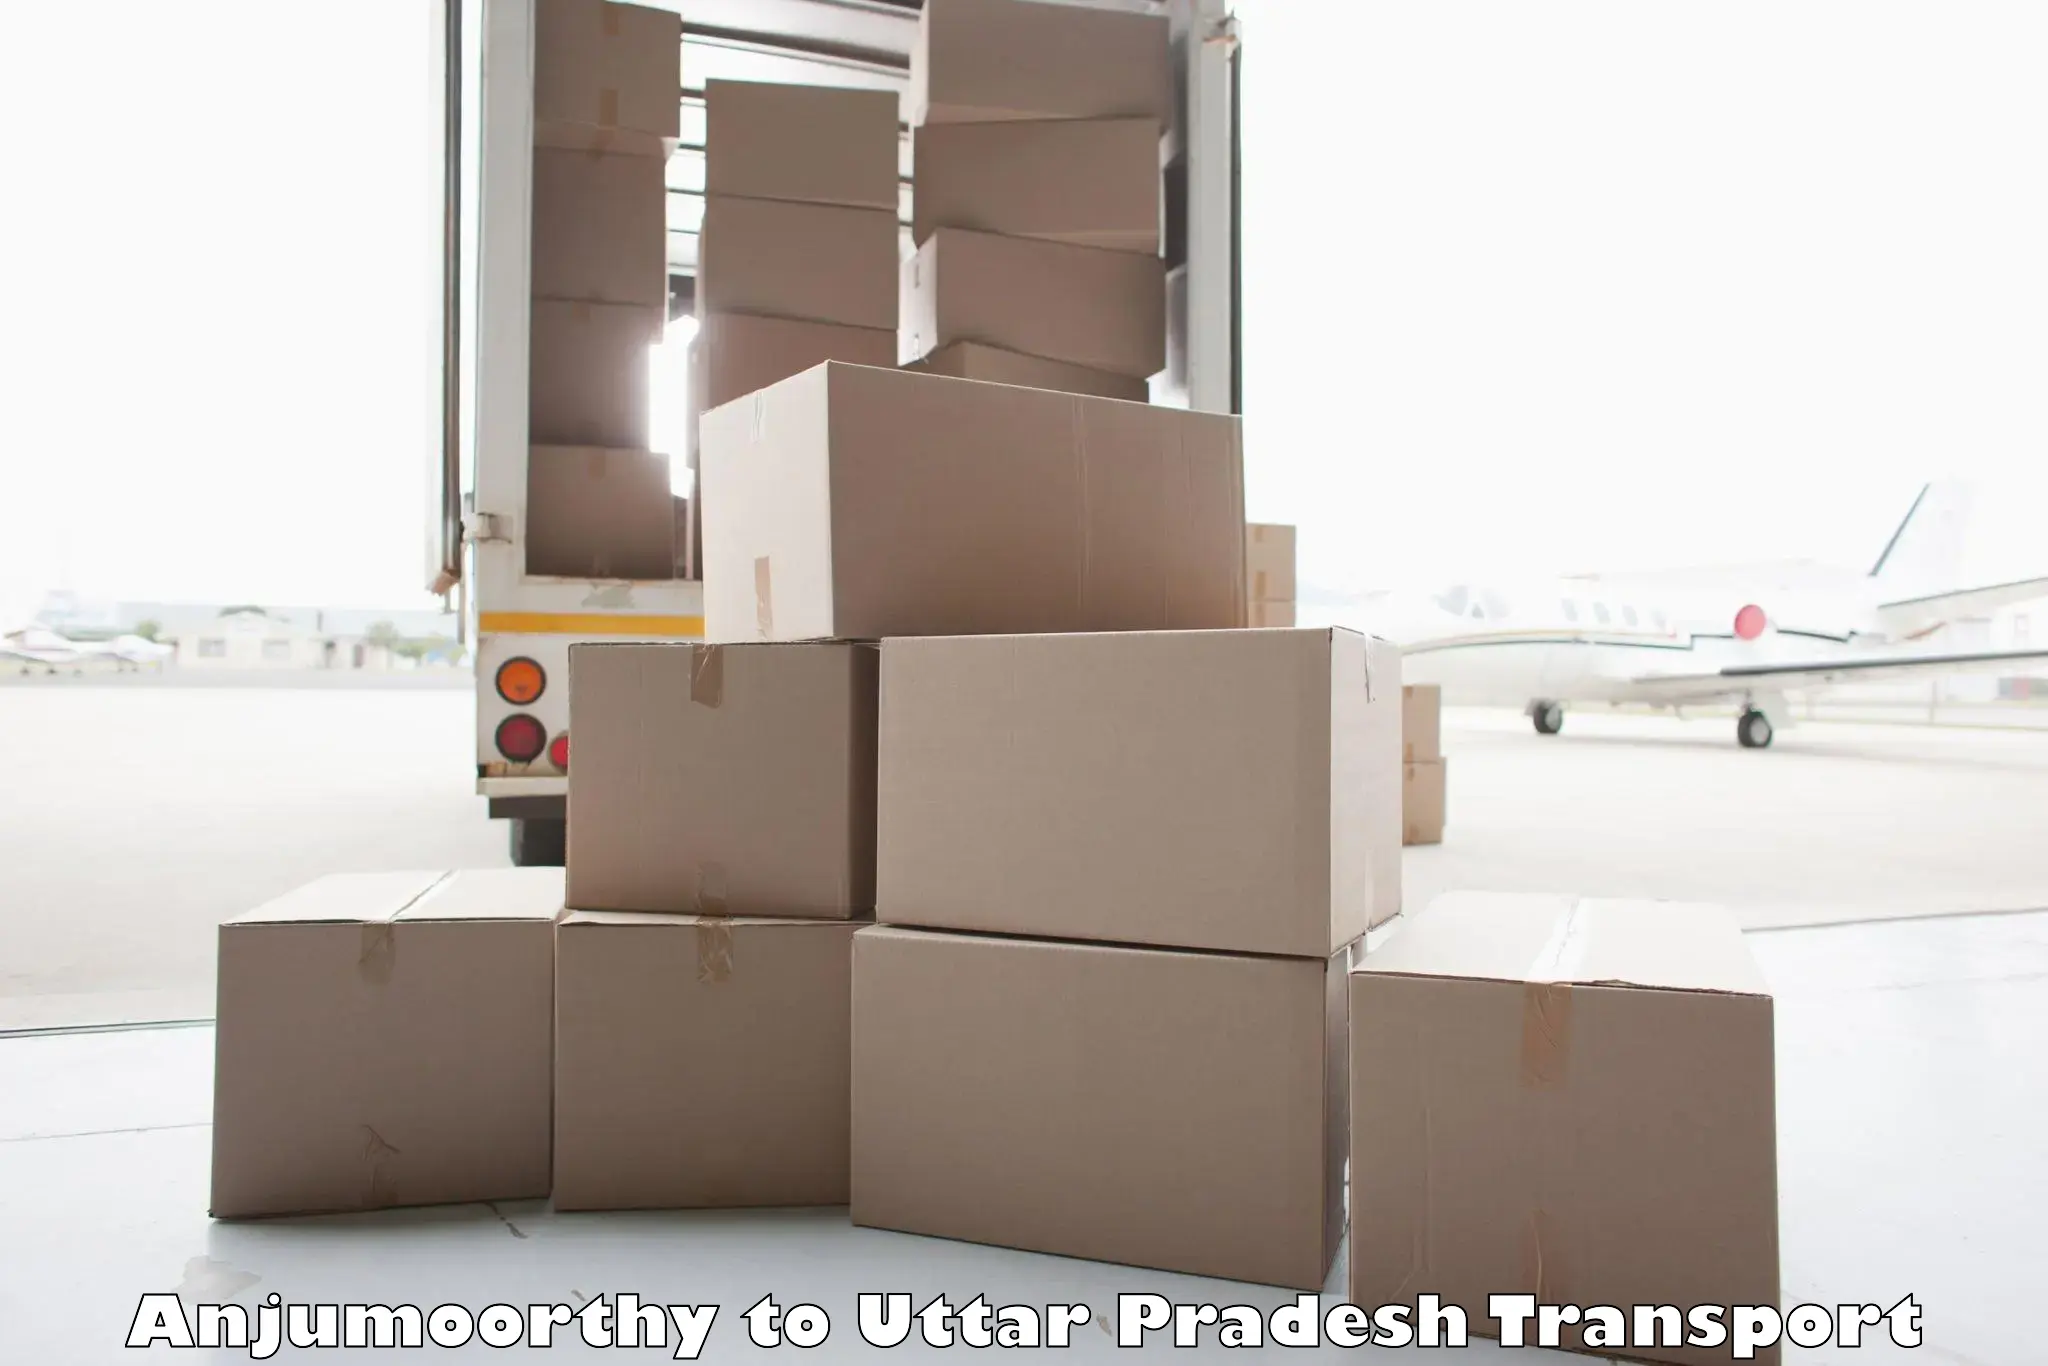 Air freight transport services Anjumoorthy to Agra